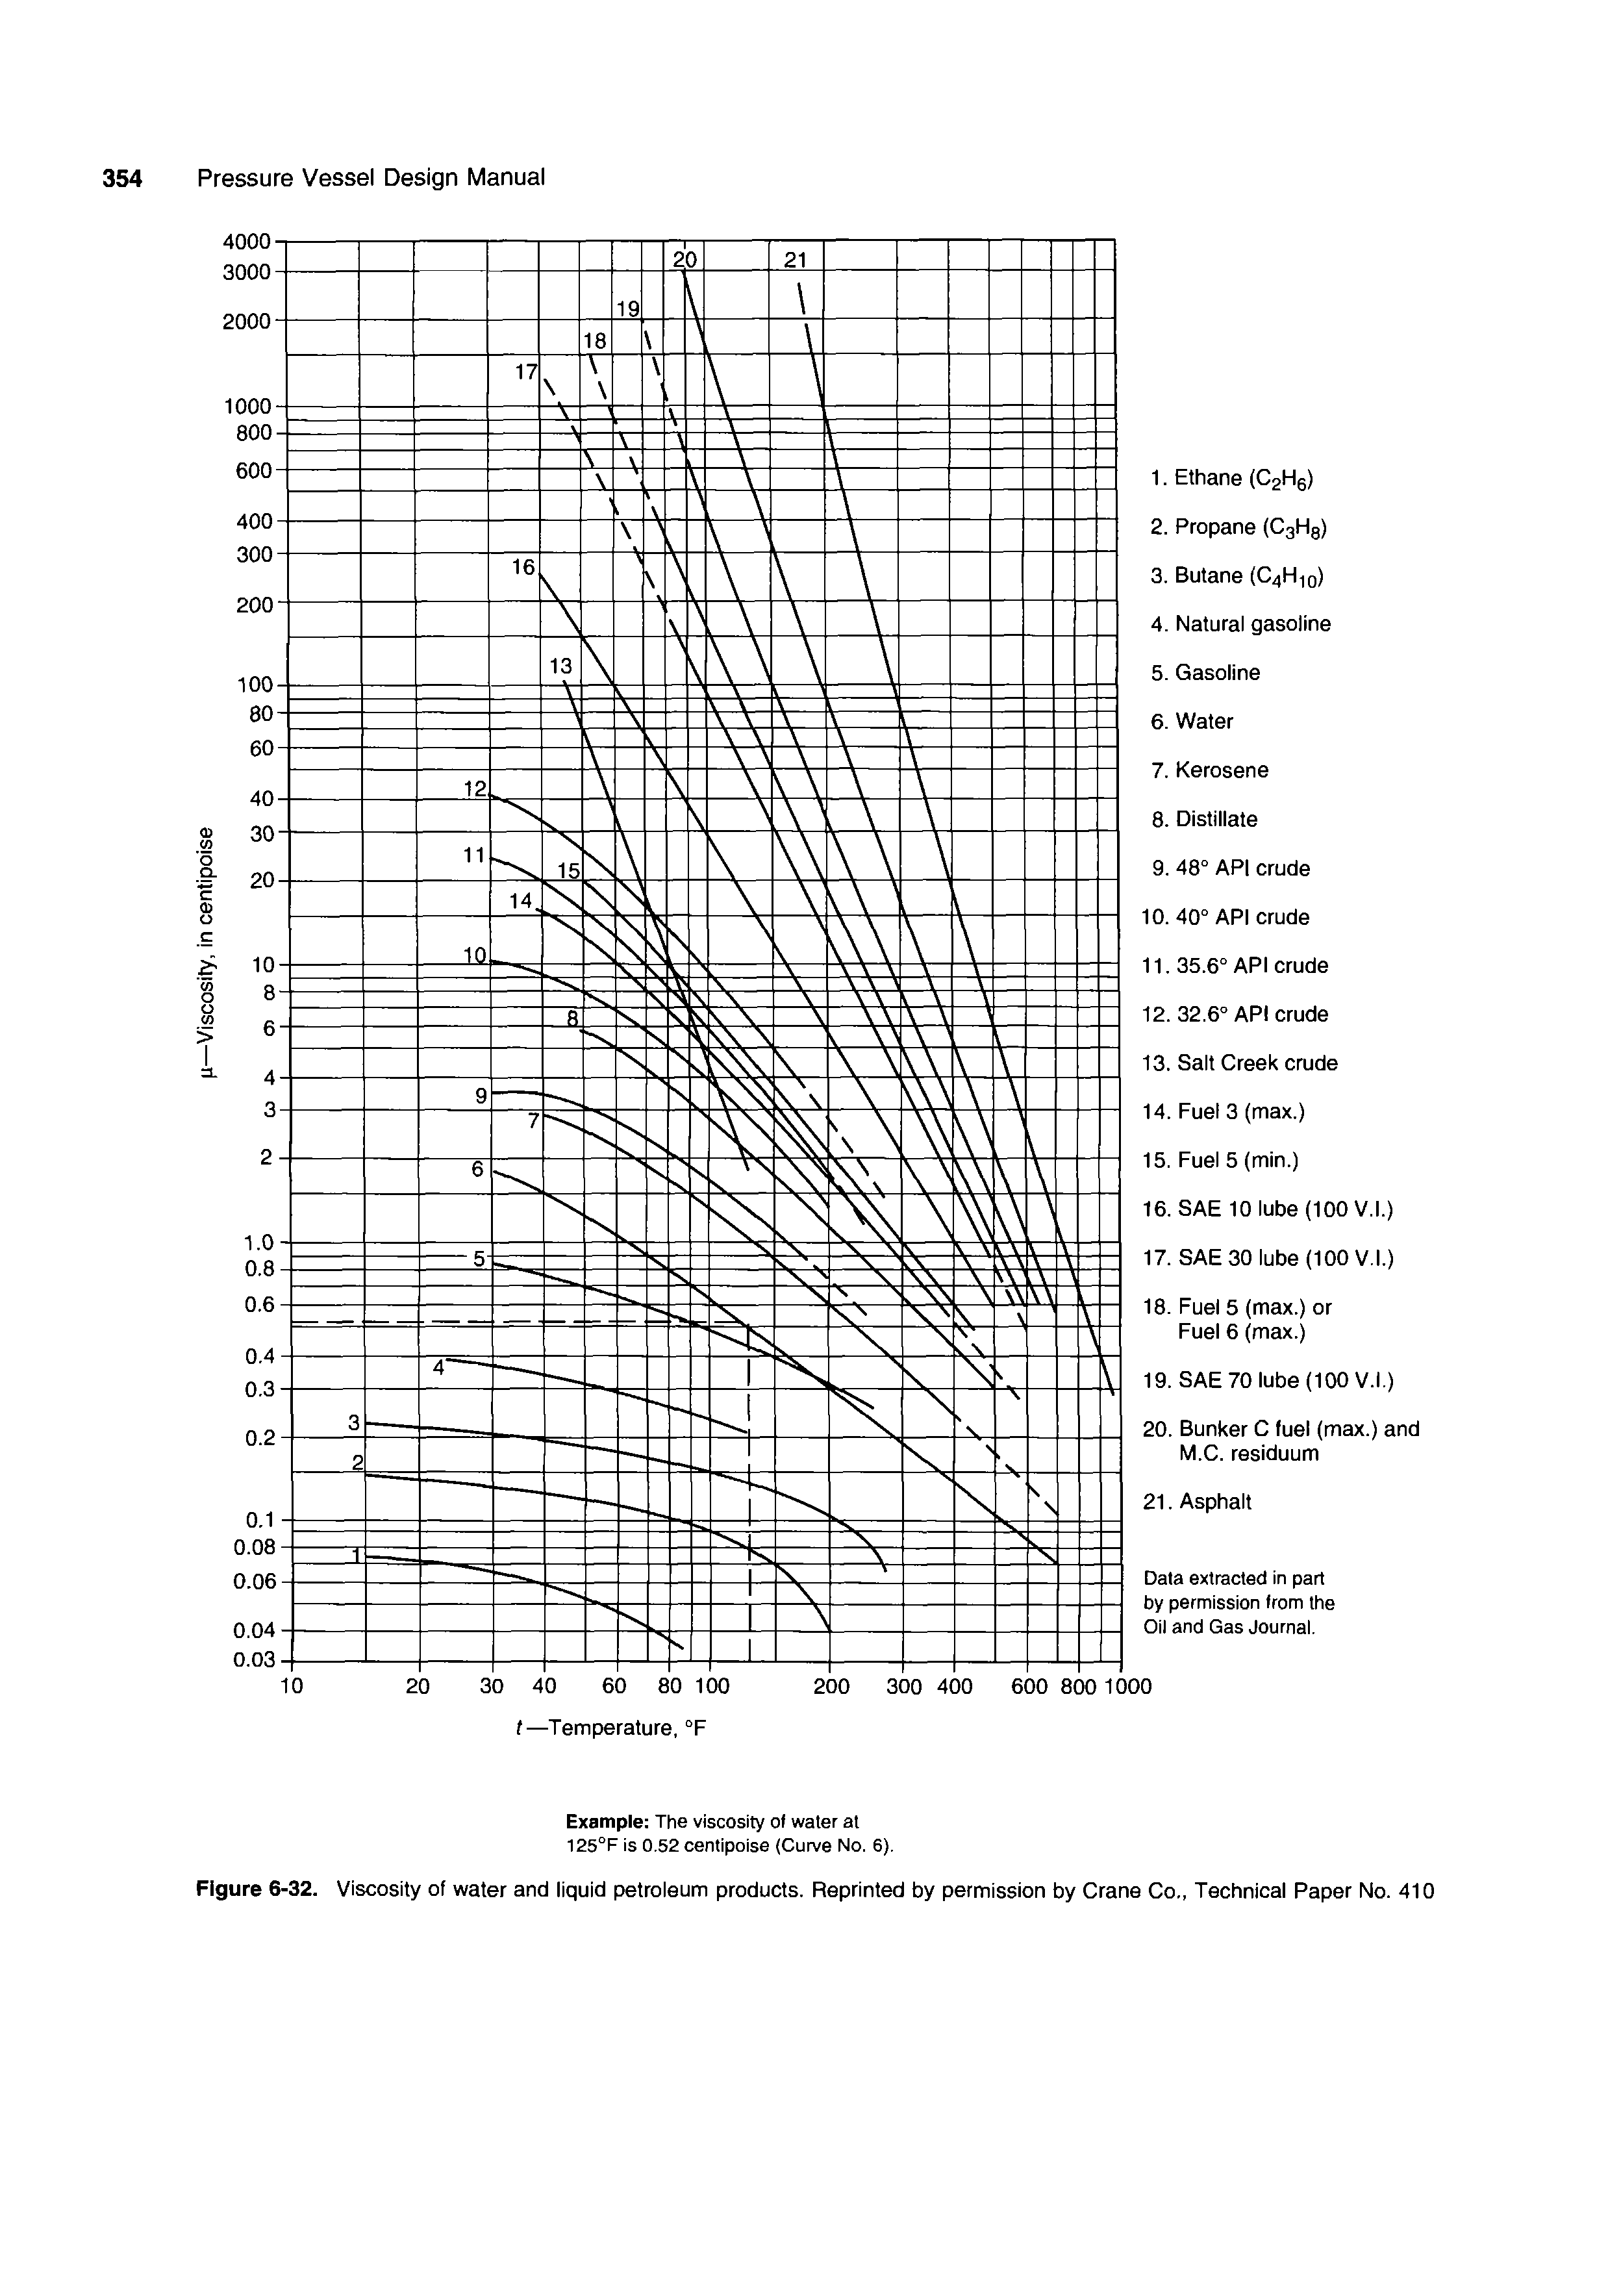 Figure 6-32. Viscosity of water and liquid petroieum products. Reprinted by permission by Crane Co, Technical Paper No. 410...